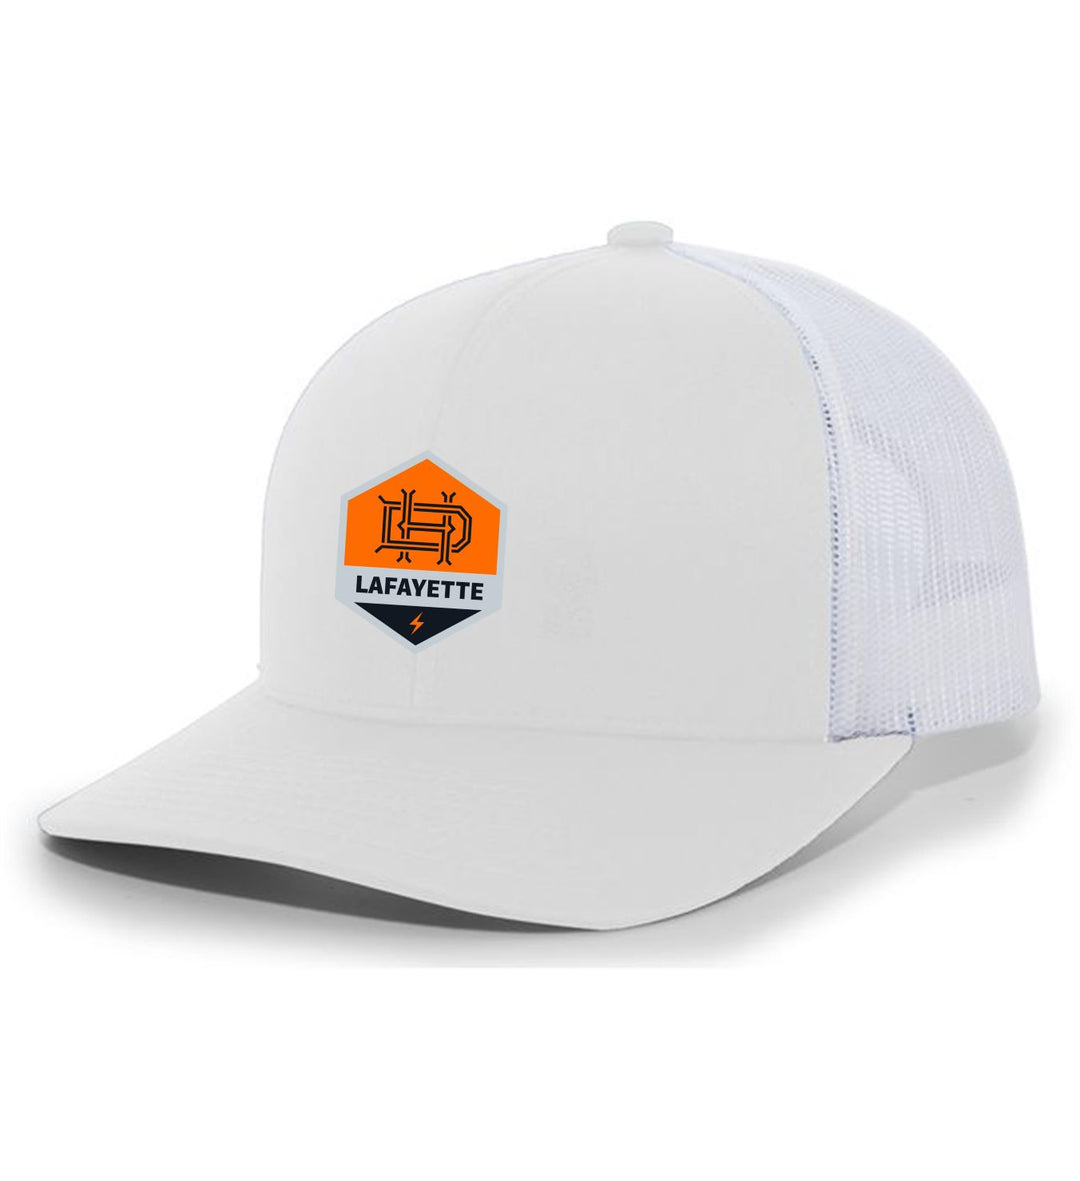 TCS Dynamo Juniors Trucker Hat  WHITE/WHITE FULL COLOR PATCH - Third Coast Soccer